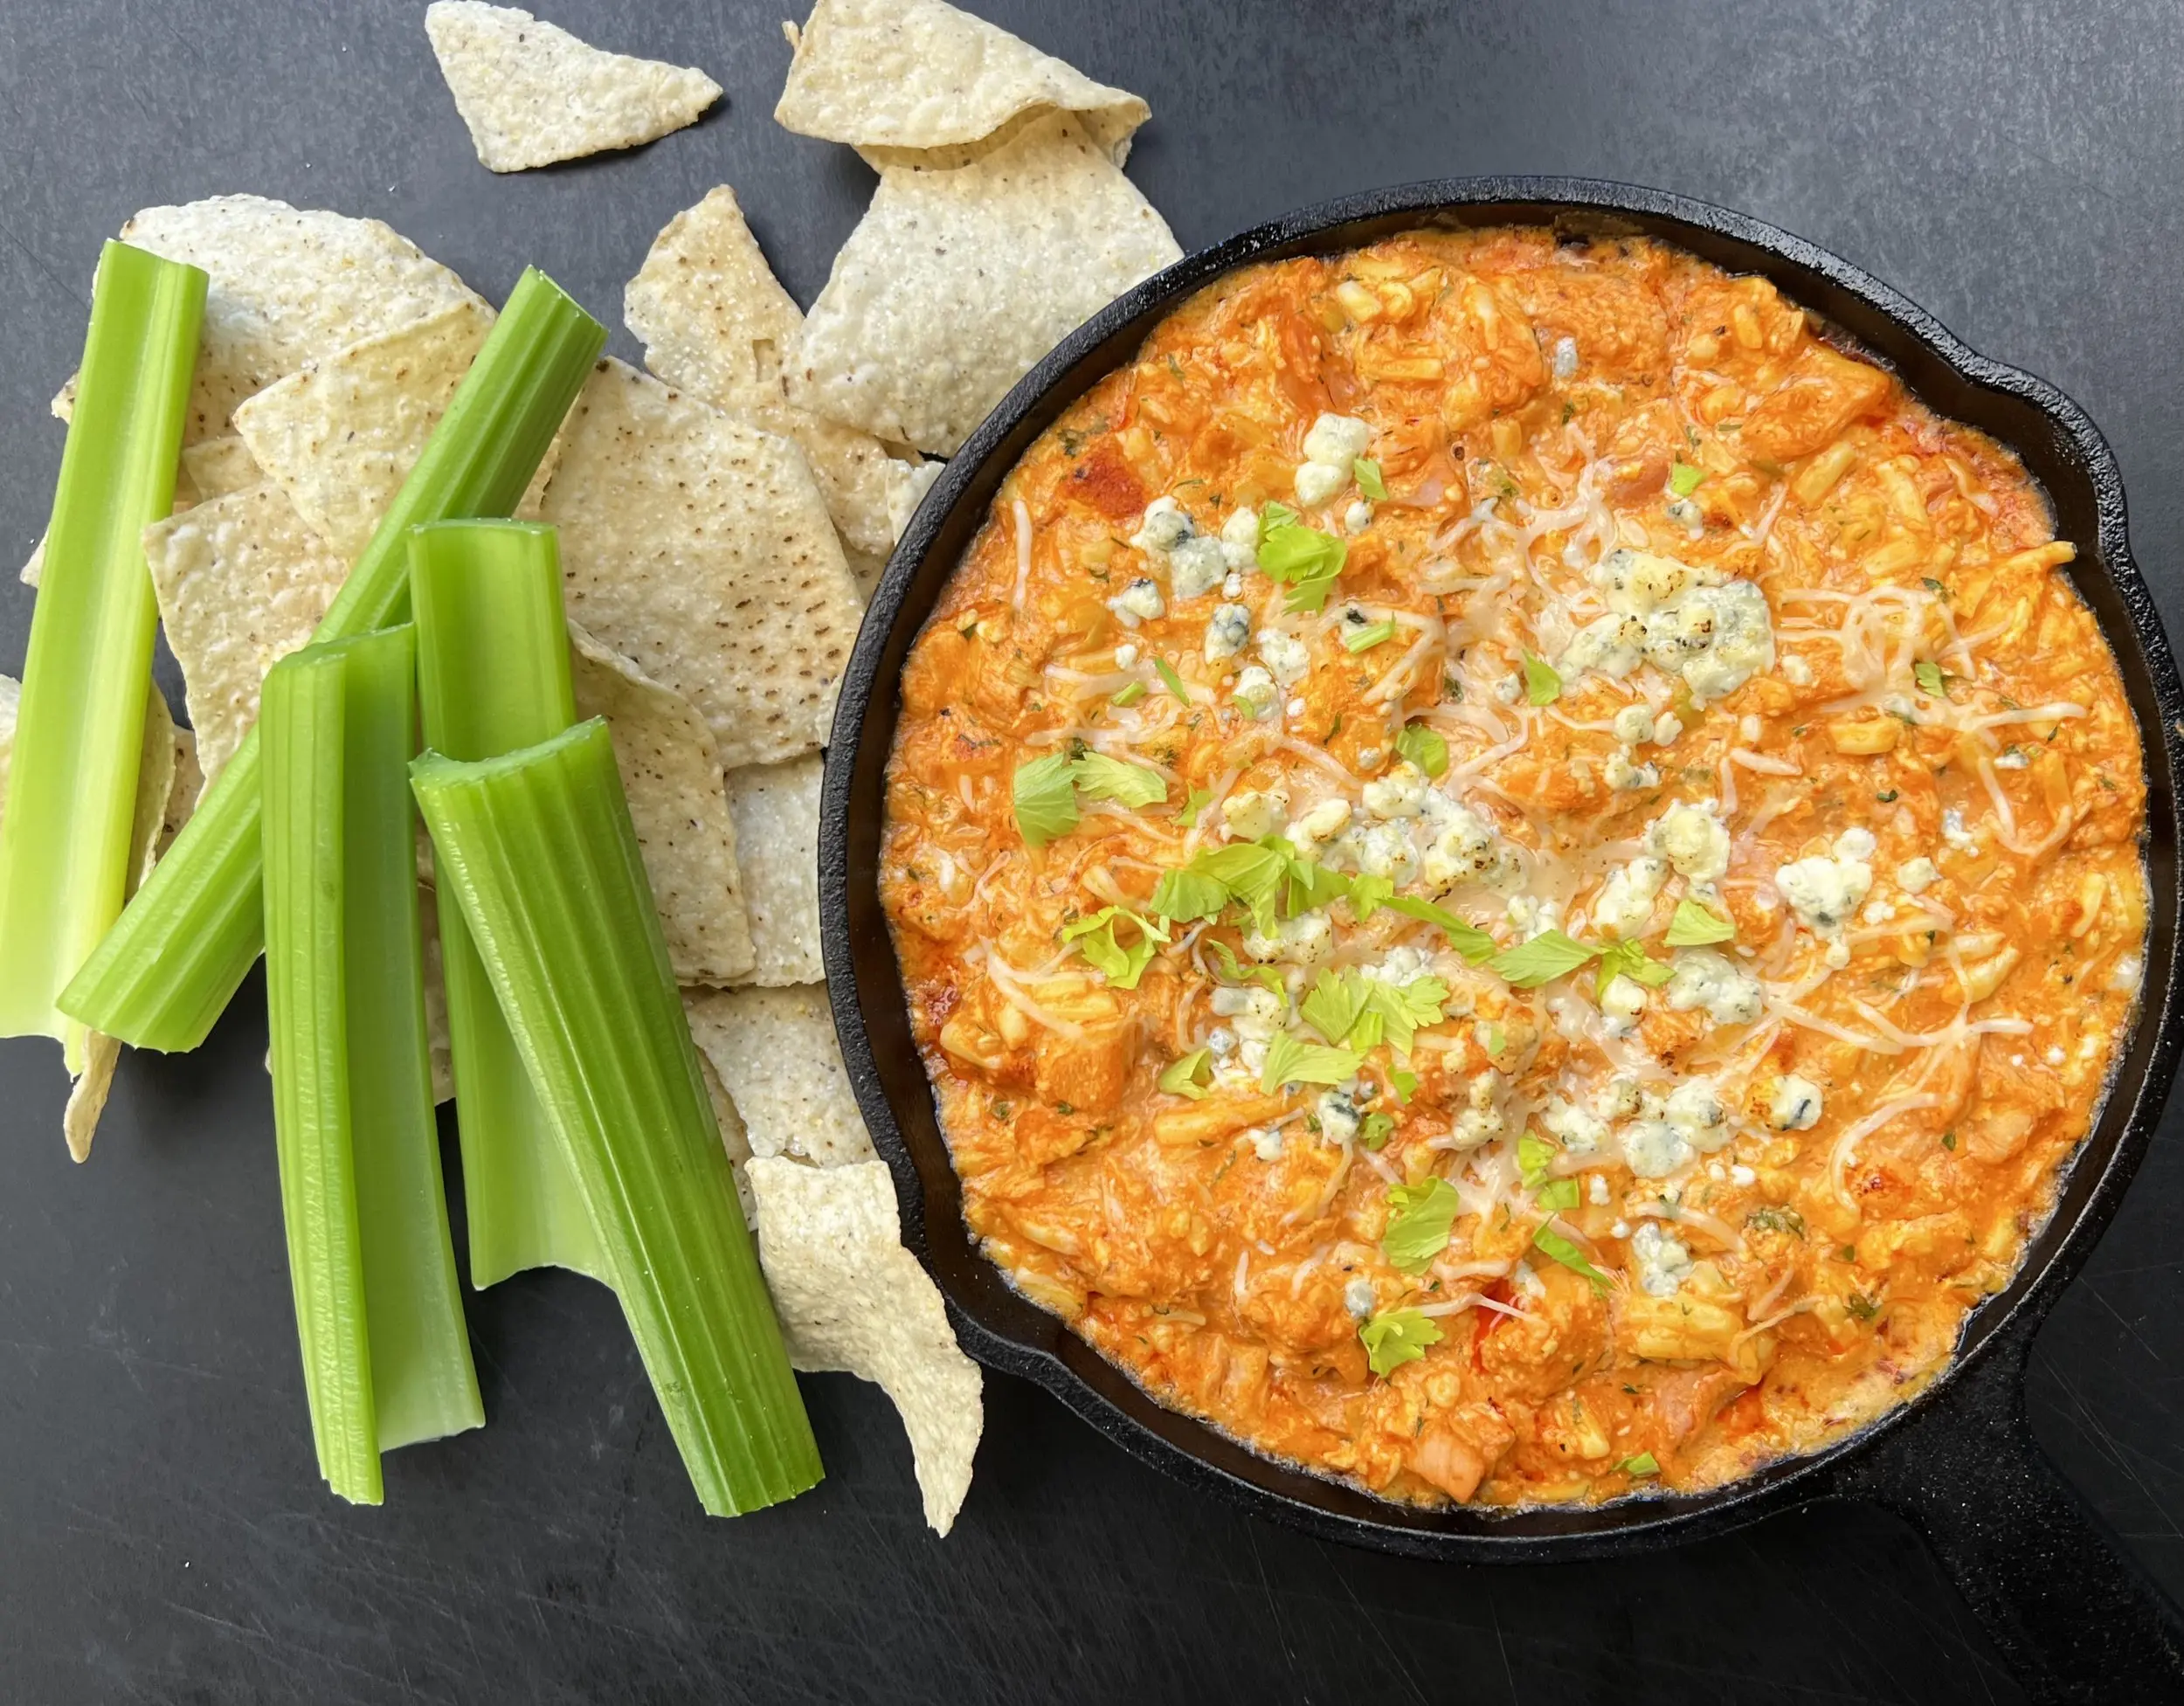 smoked buffalo chicken dip - What goes with buffalo chicken dip